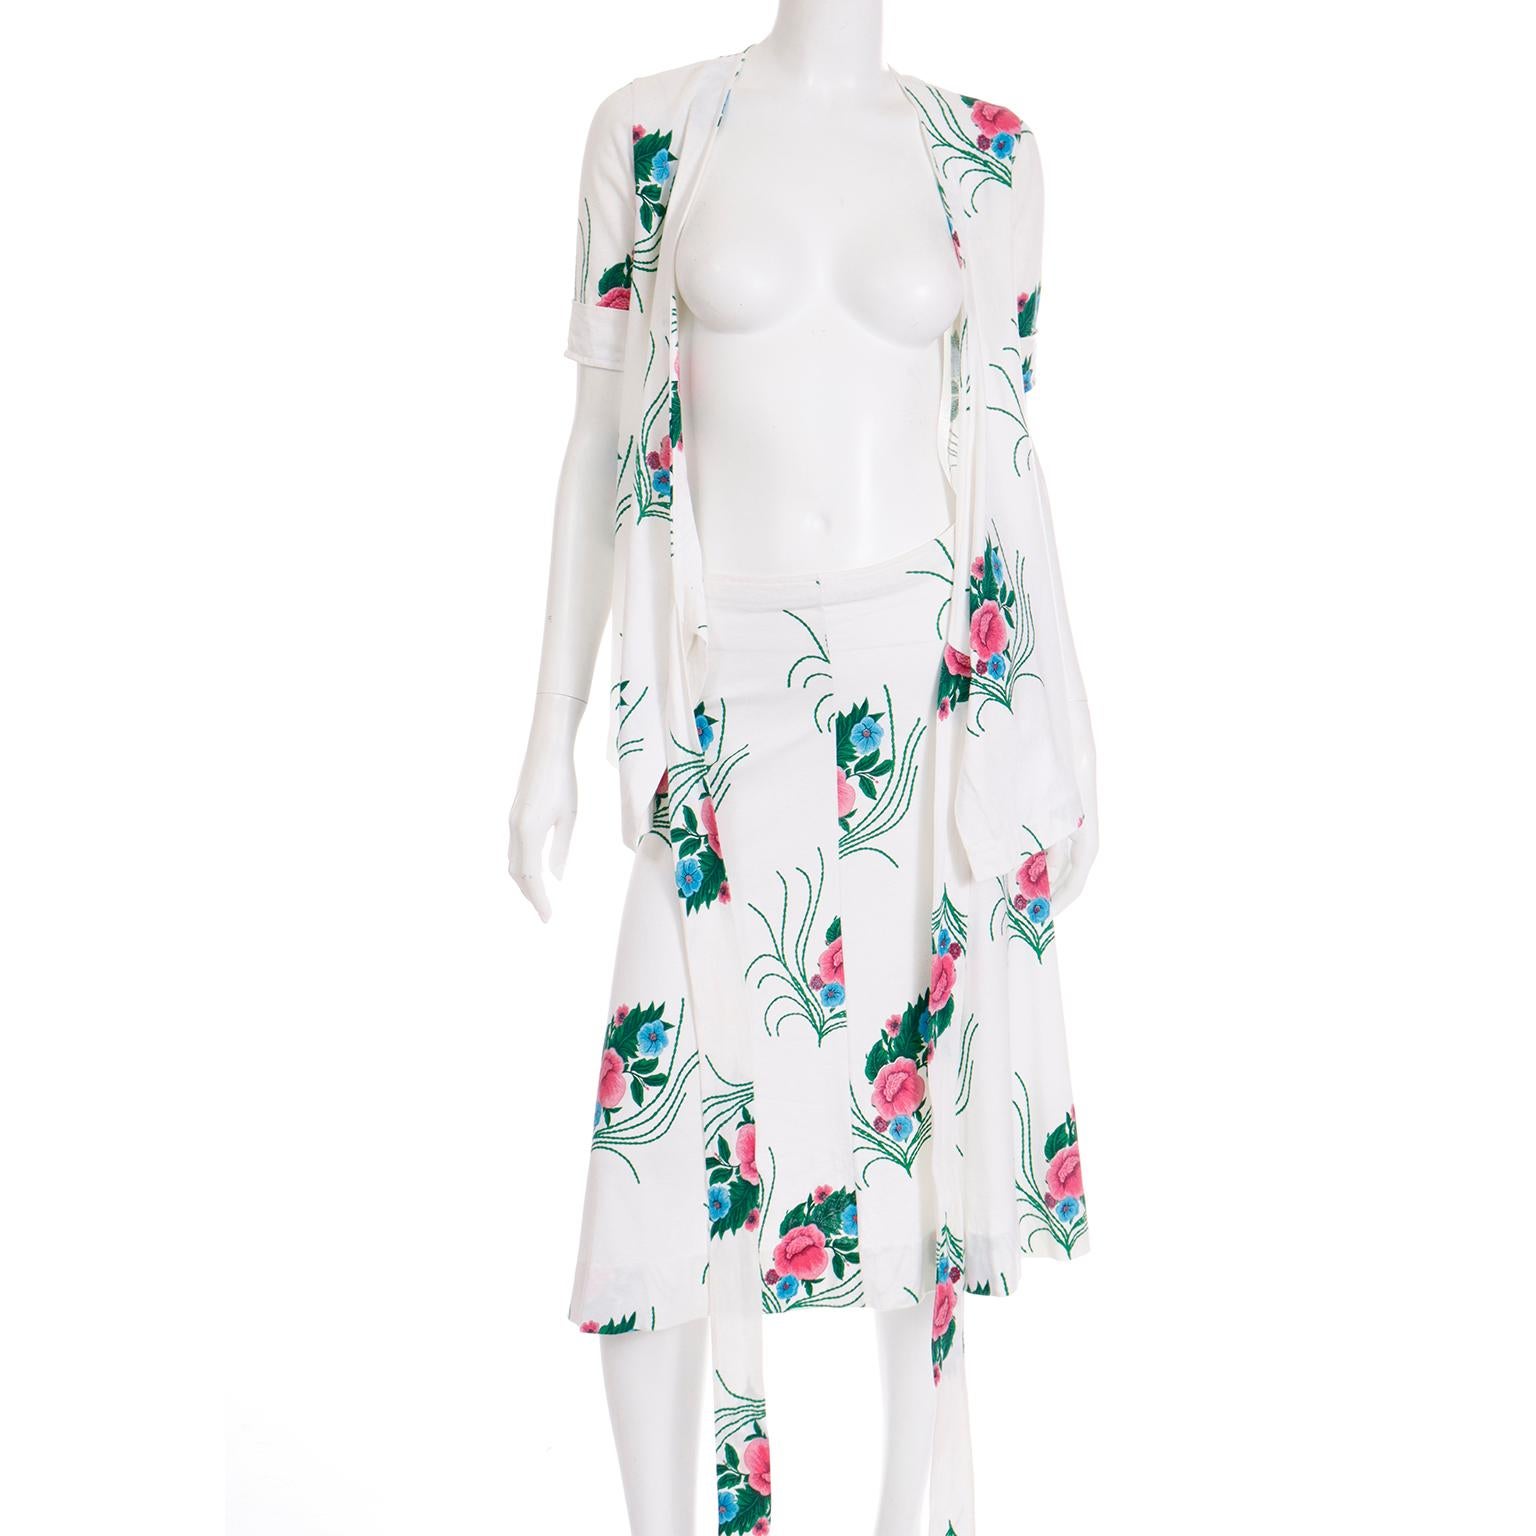 1970s Diane Von Furstenberg Vintage Floral 2pc Dress w Wrap Top and Skirt In Excellent Condition For Sale In Portland, OR